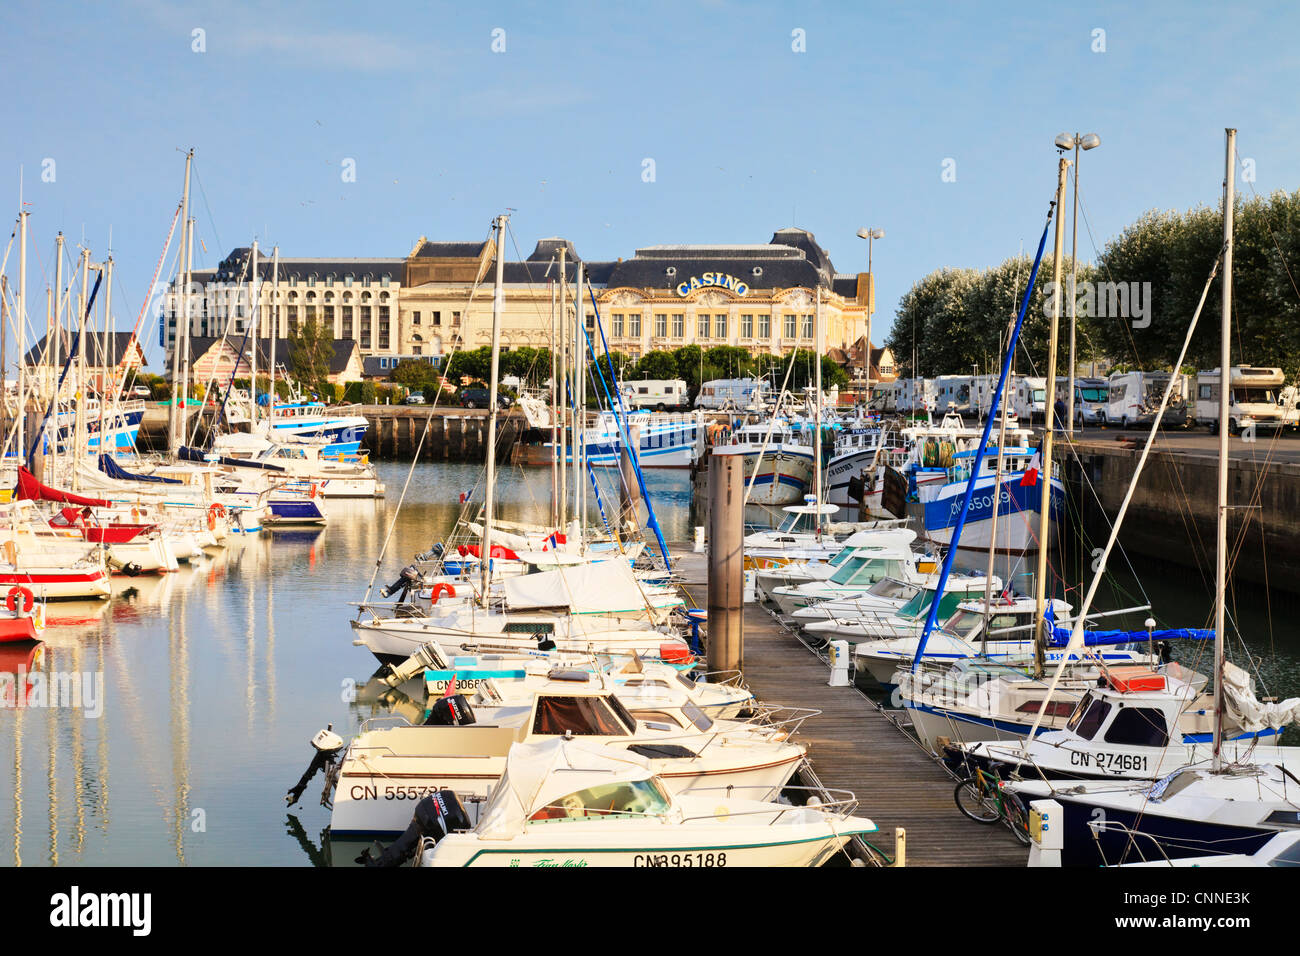 The casino and marina at Trouville, Normandy, France. Stock Photo